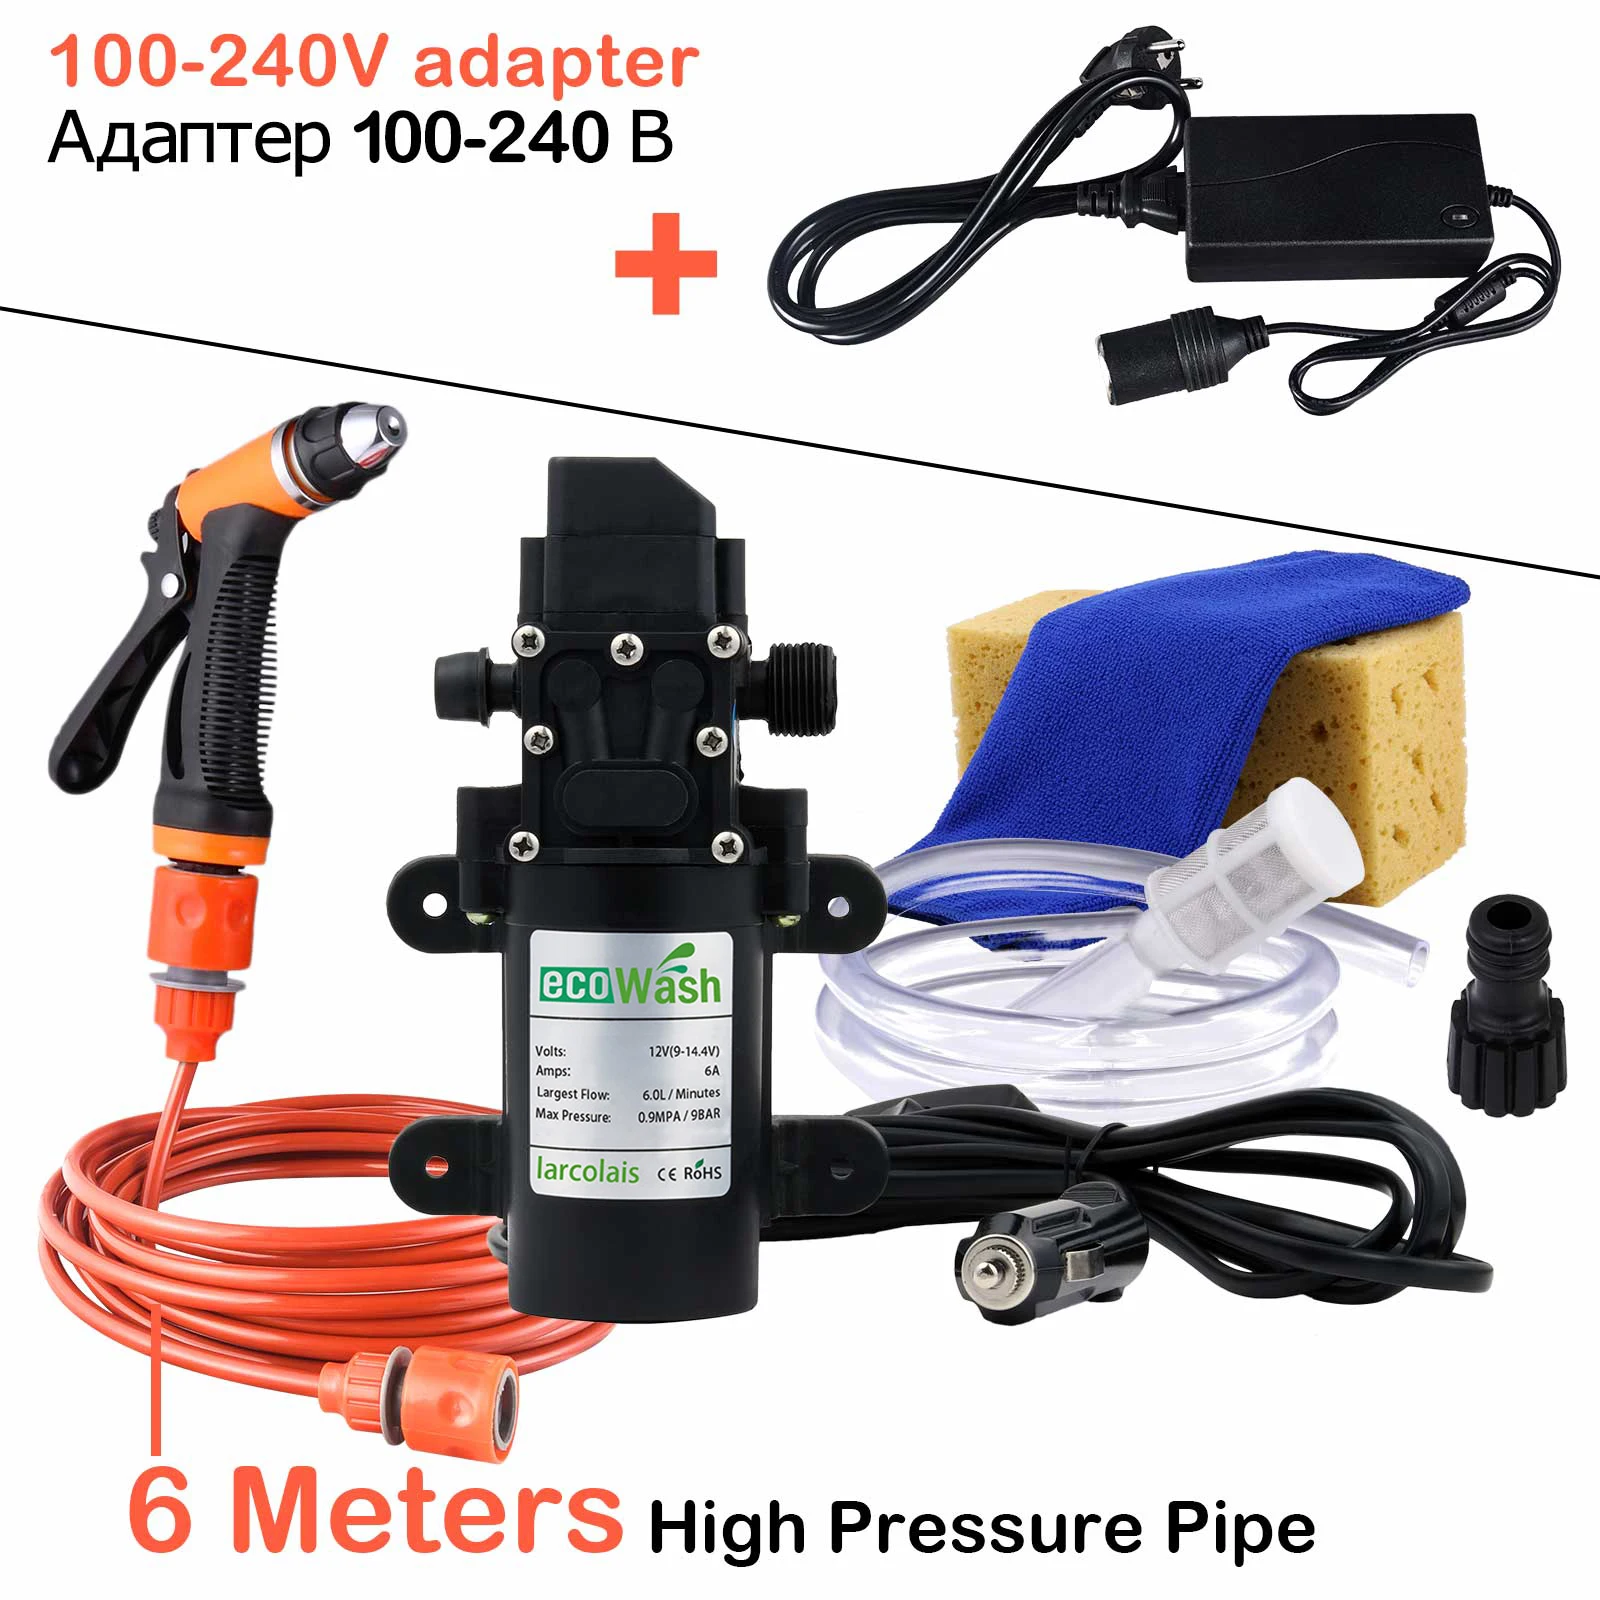 Car Washer Car Wash 12V Washer Car Gun Pump High Pressure Cleaner Car Care Portable Washing Machine Electric Cleaning Auto Device cordless power washer Car Washing Tools